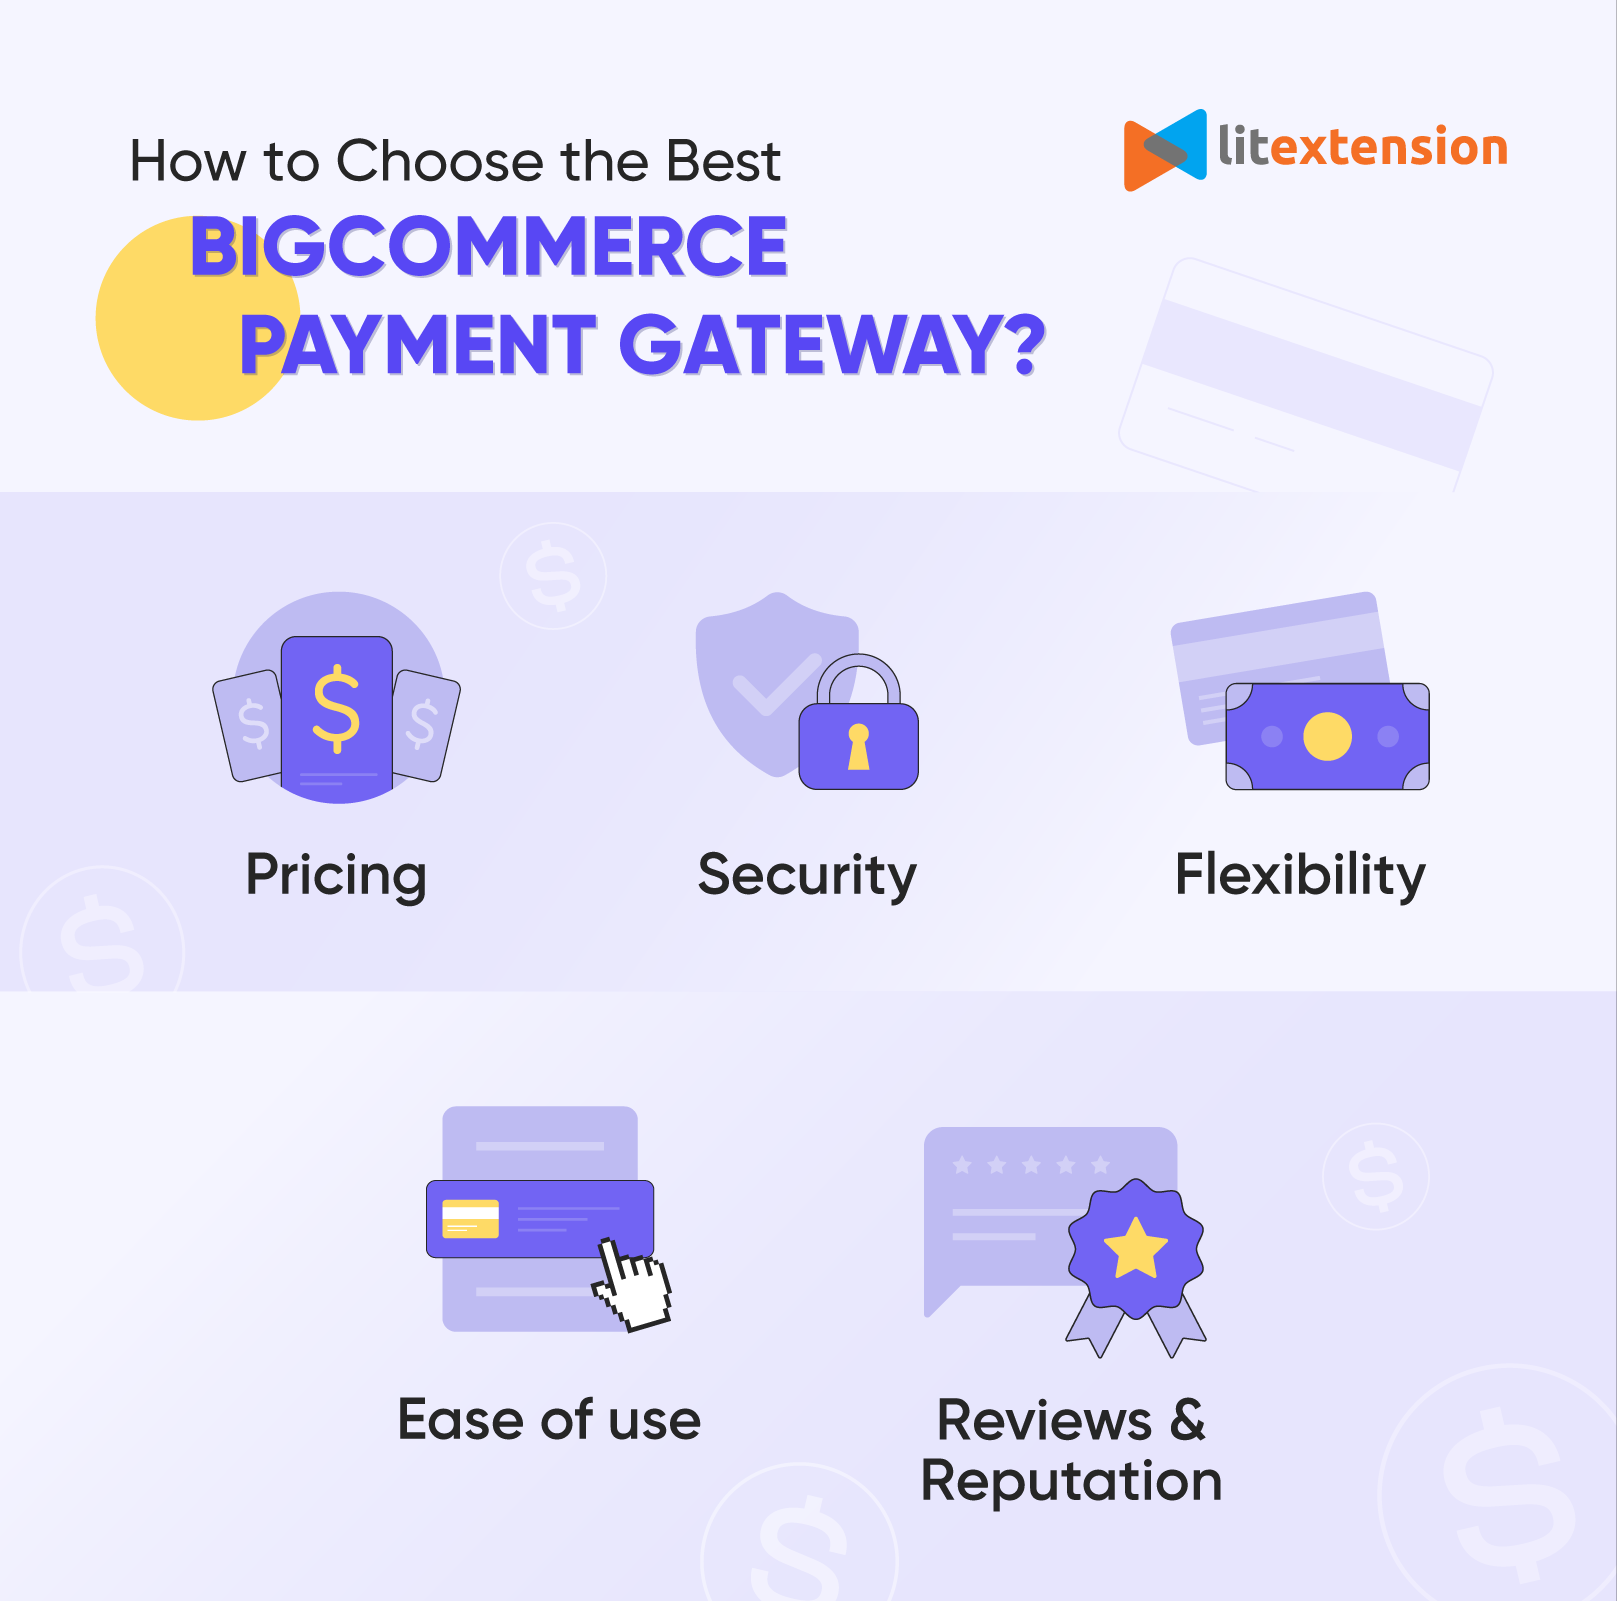 How to choose the best BigCommerce payment gateway?